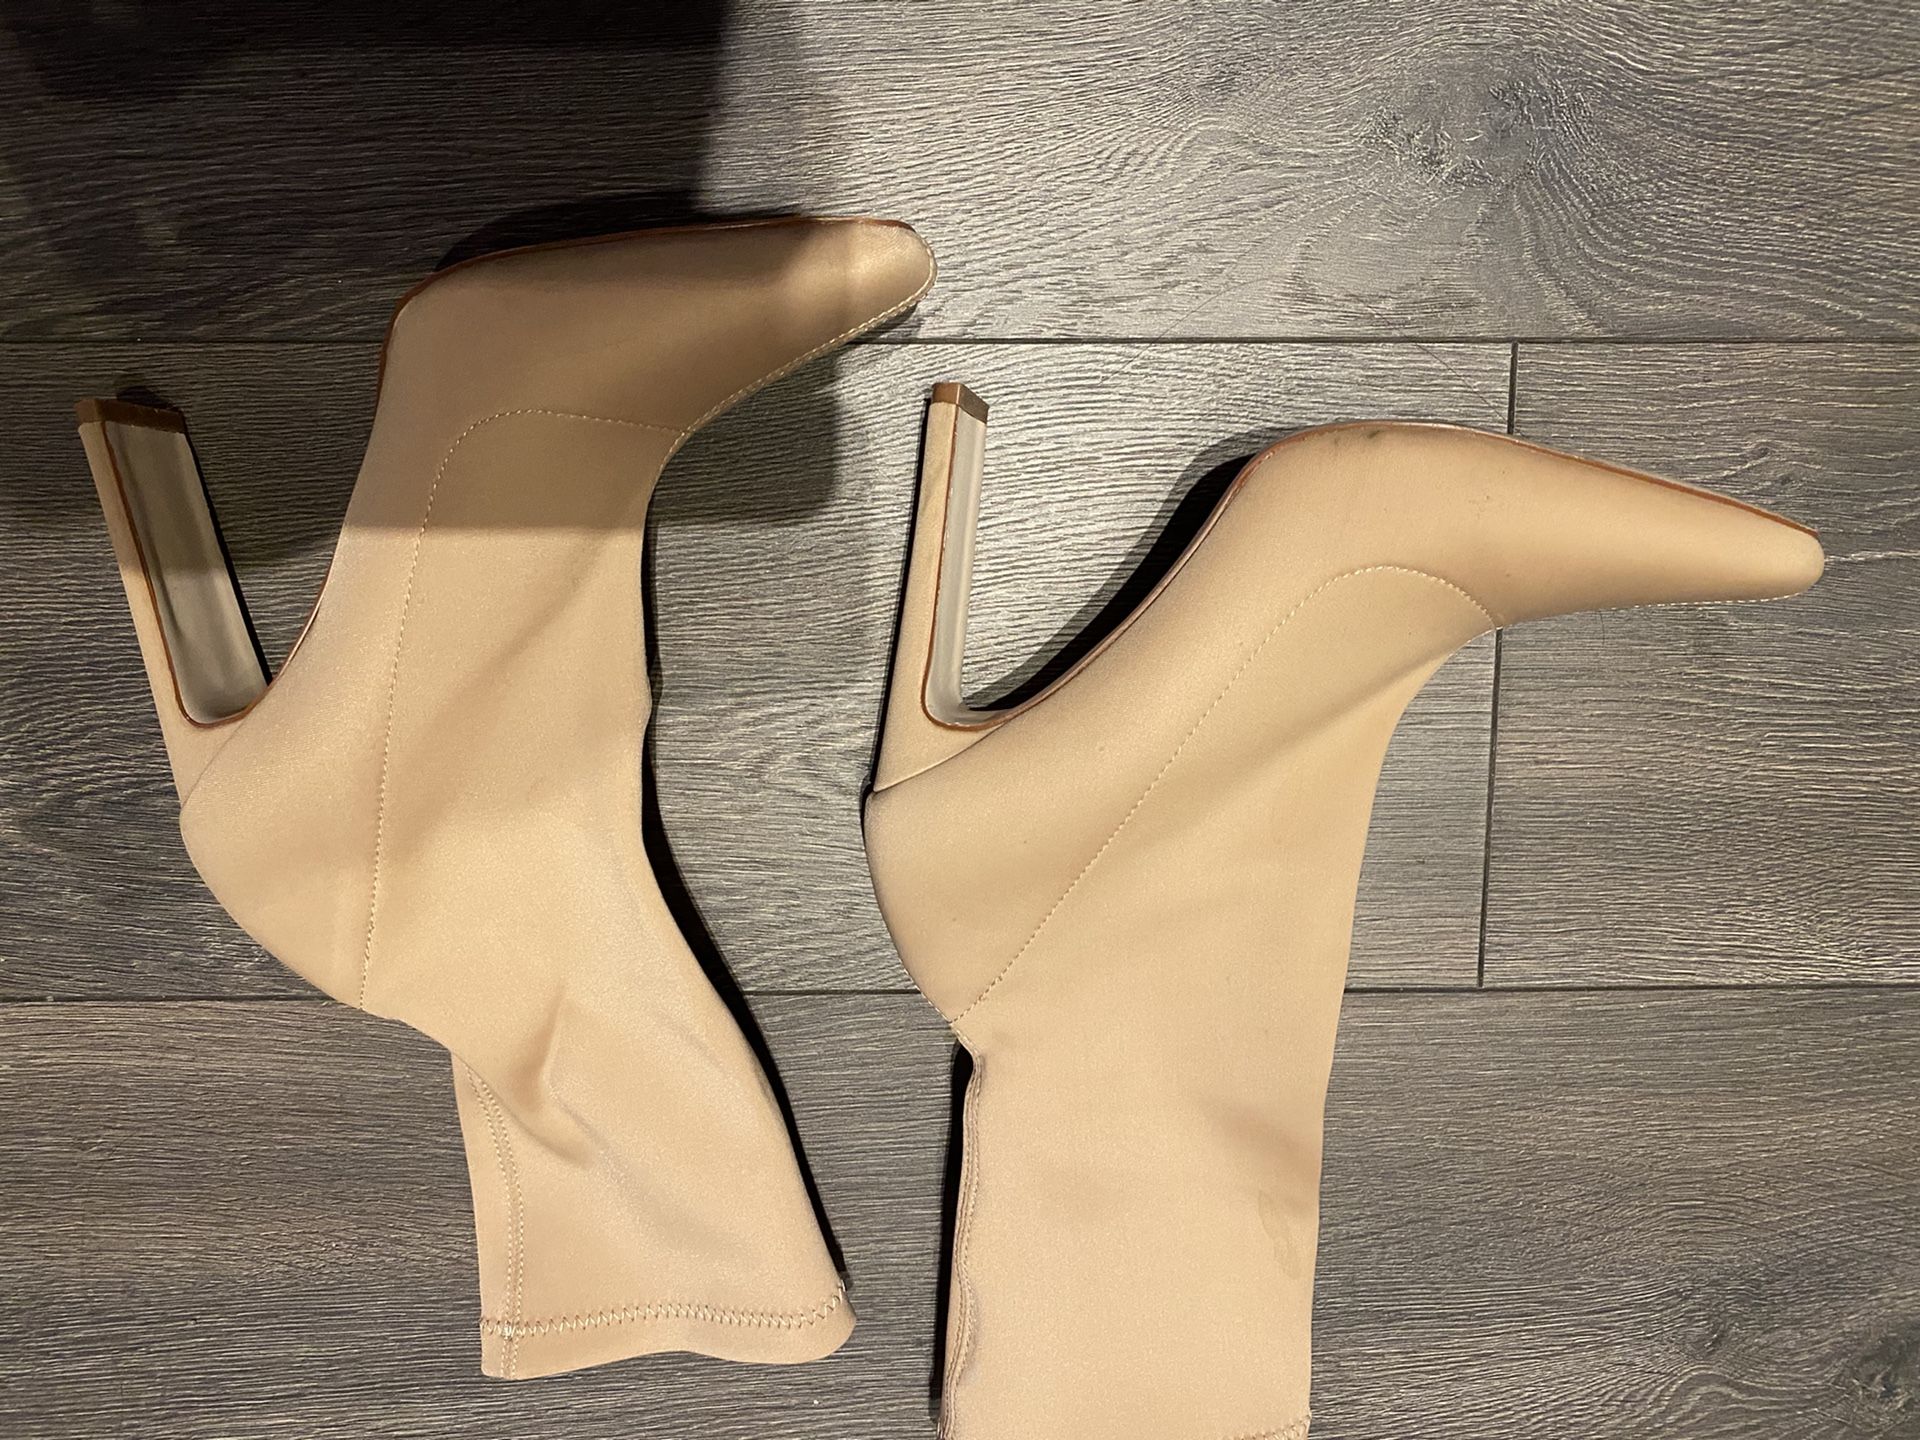 Nude/ Light Tan boots size 8 - used once